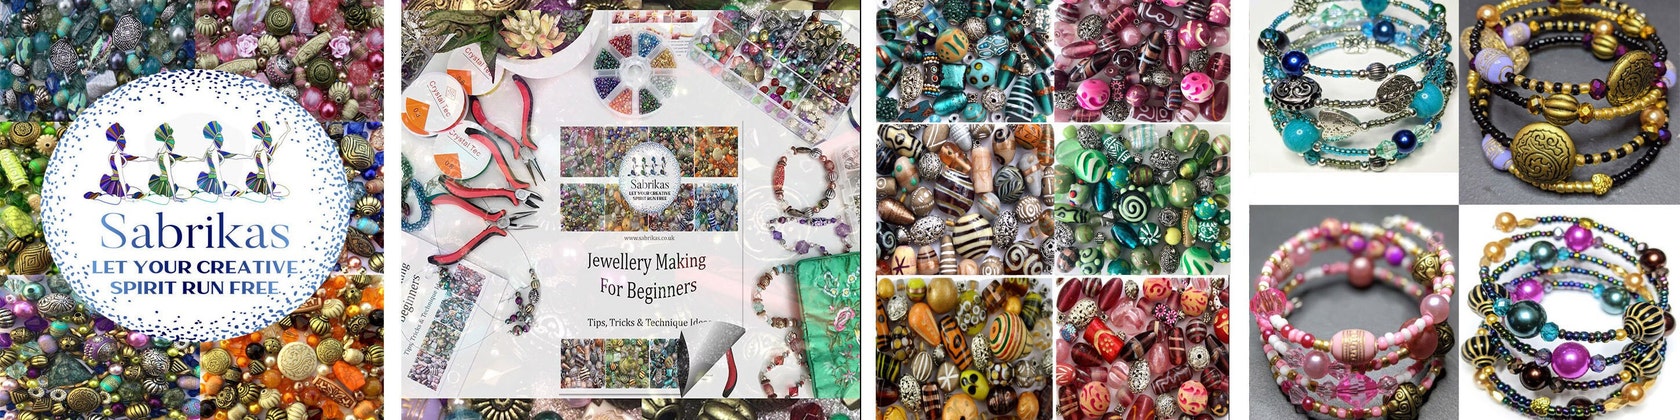 Jewellery Making Kit Craft Wire Art DIY Necklace Bracelet Earrings Gift Set  Teen Girls to Adults for Beginners With Complete Video Tutorials 